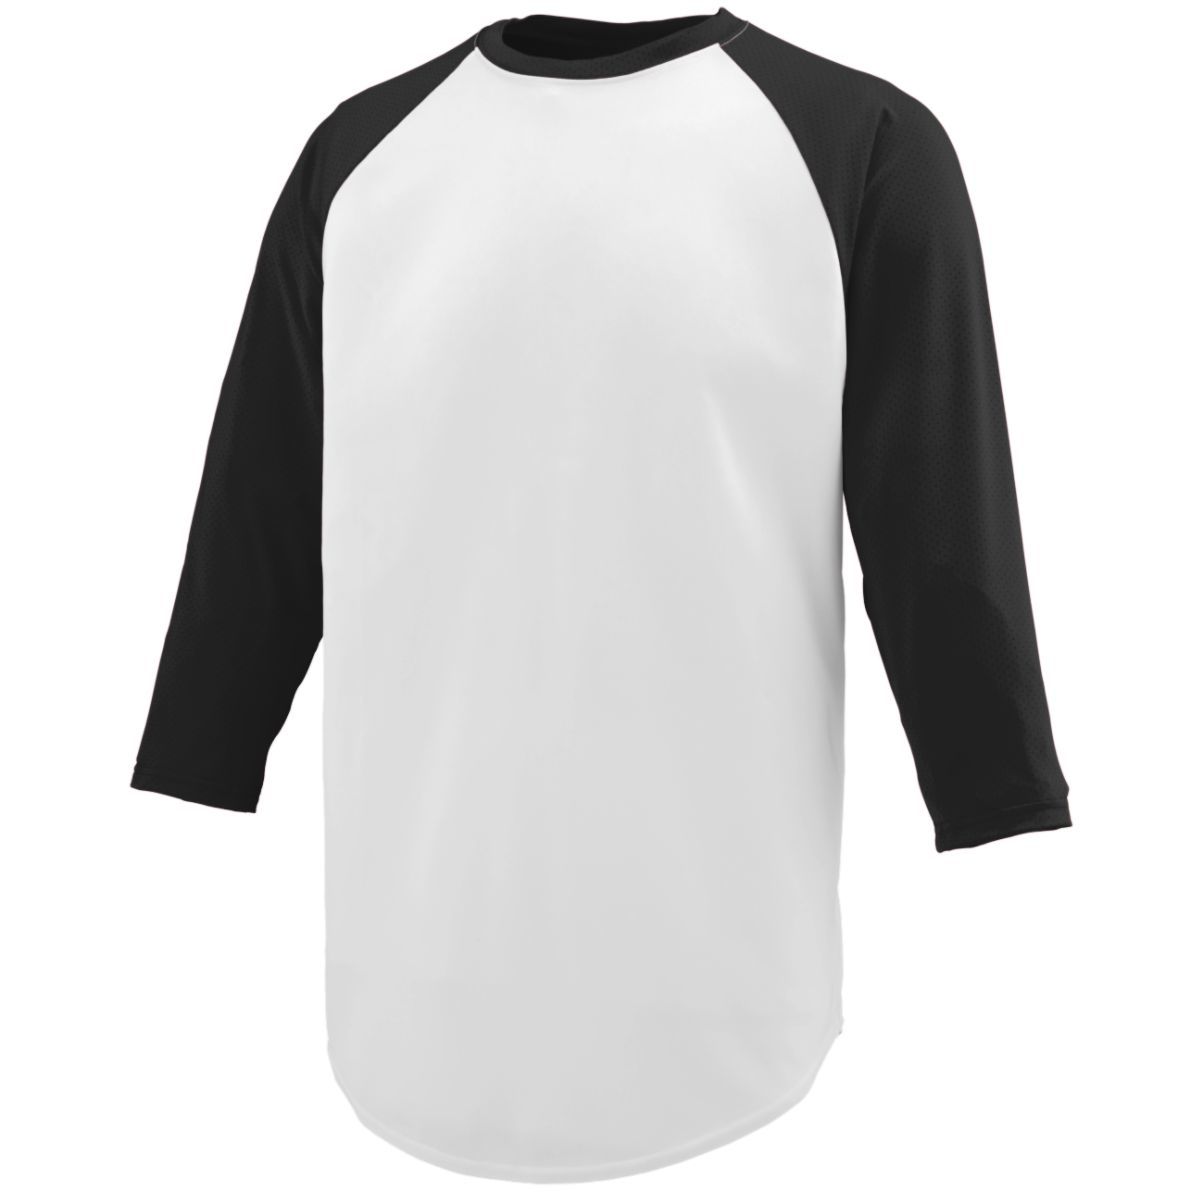 Augusta Sportswear Youth Nova Jersey in White/Black  -Part of the Youth, Youth-Jersey, Augusta-Products, Baseball, Shirts, All-Sports, All-Sports-1 product lines at KanaleyCreations.com